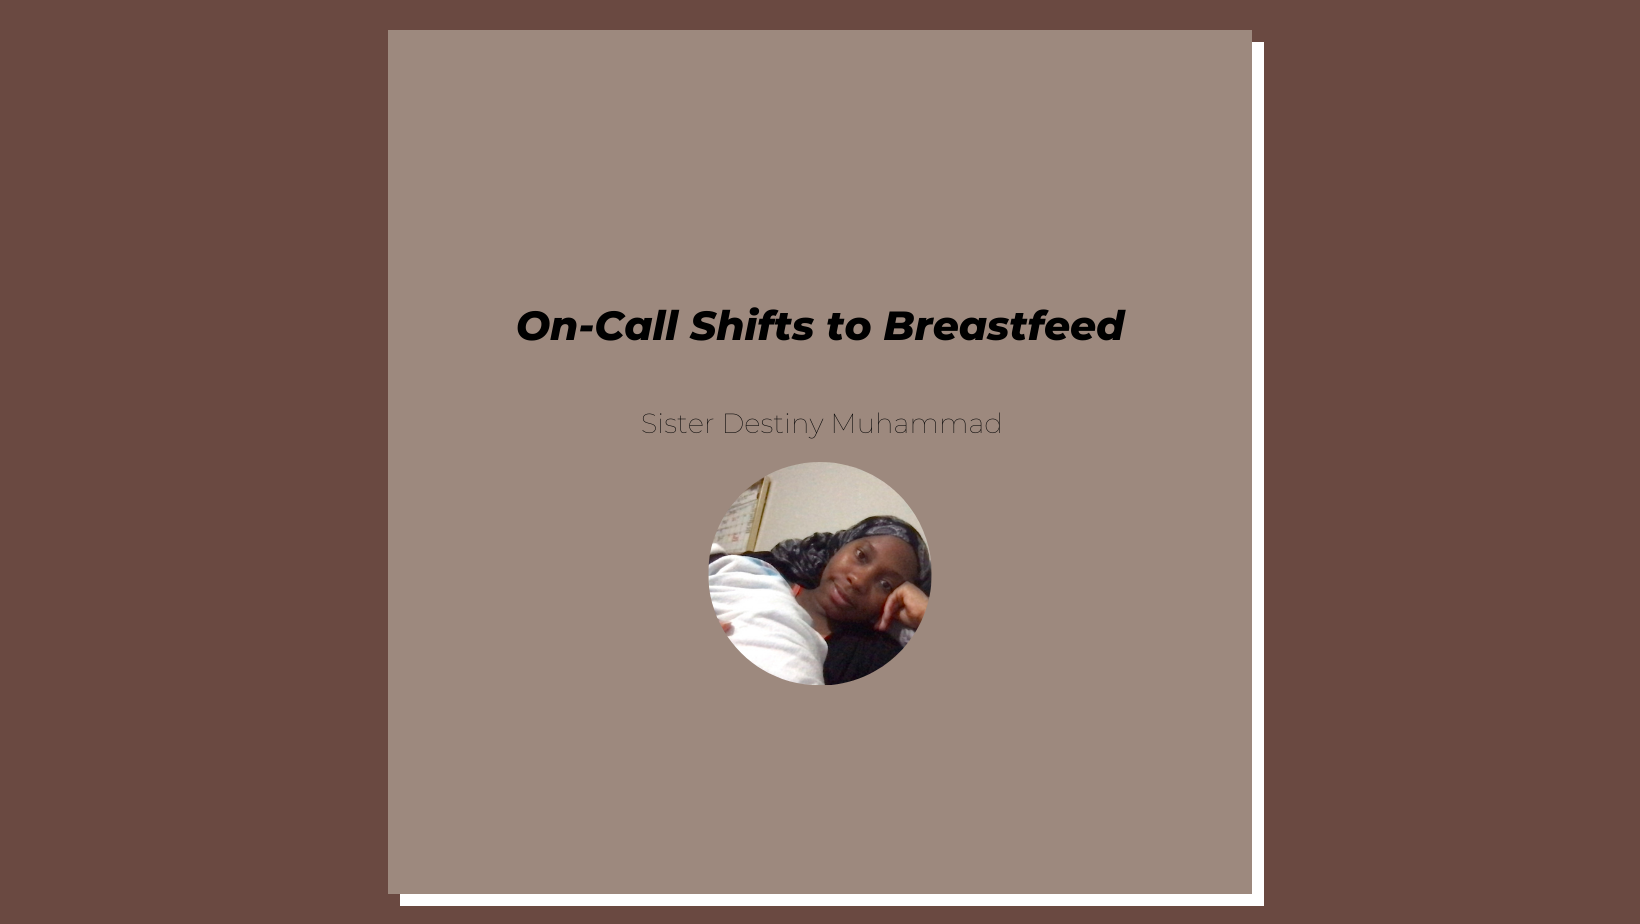 On-Call Shifts to Breastfeed